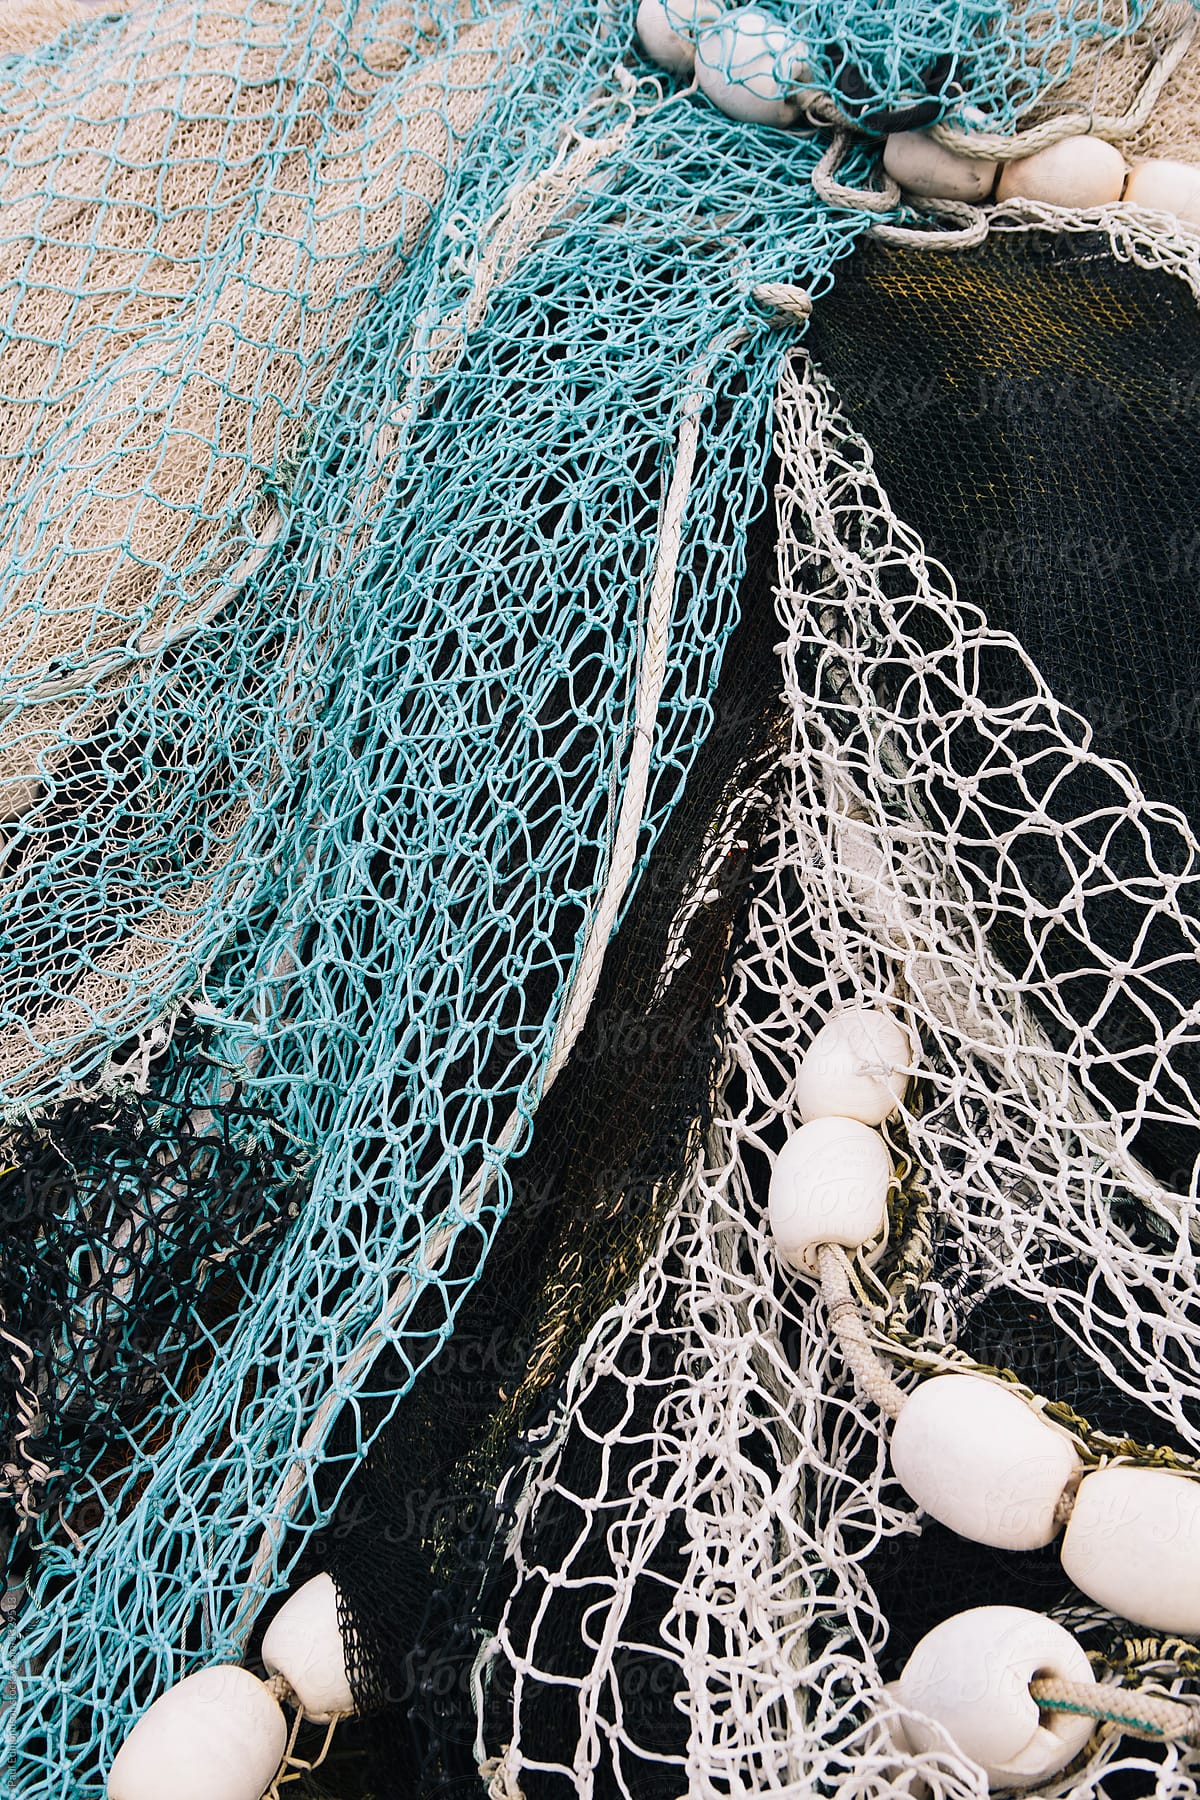 Detail of commercial fishnets